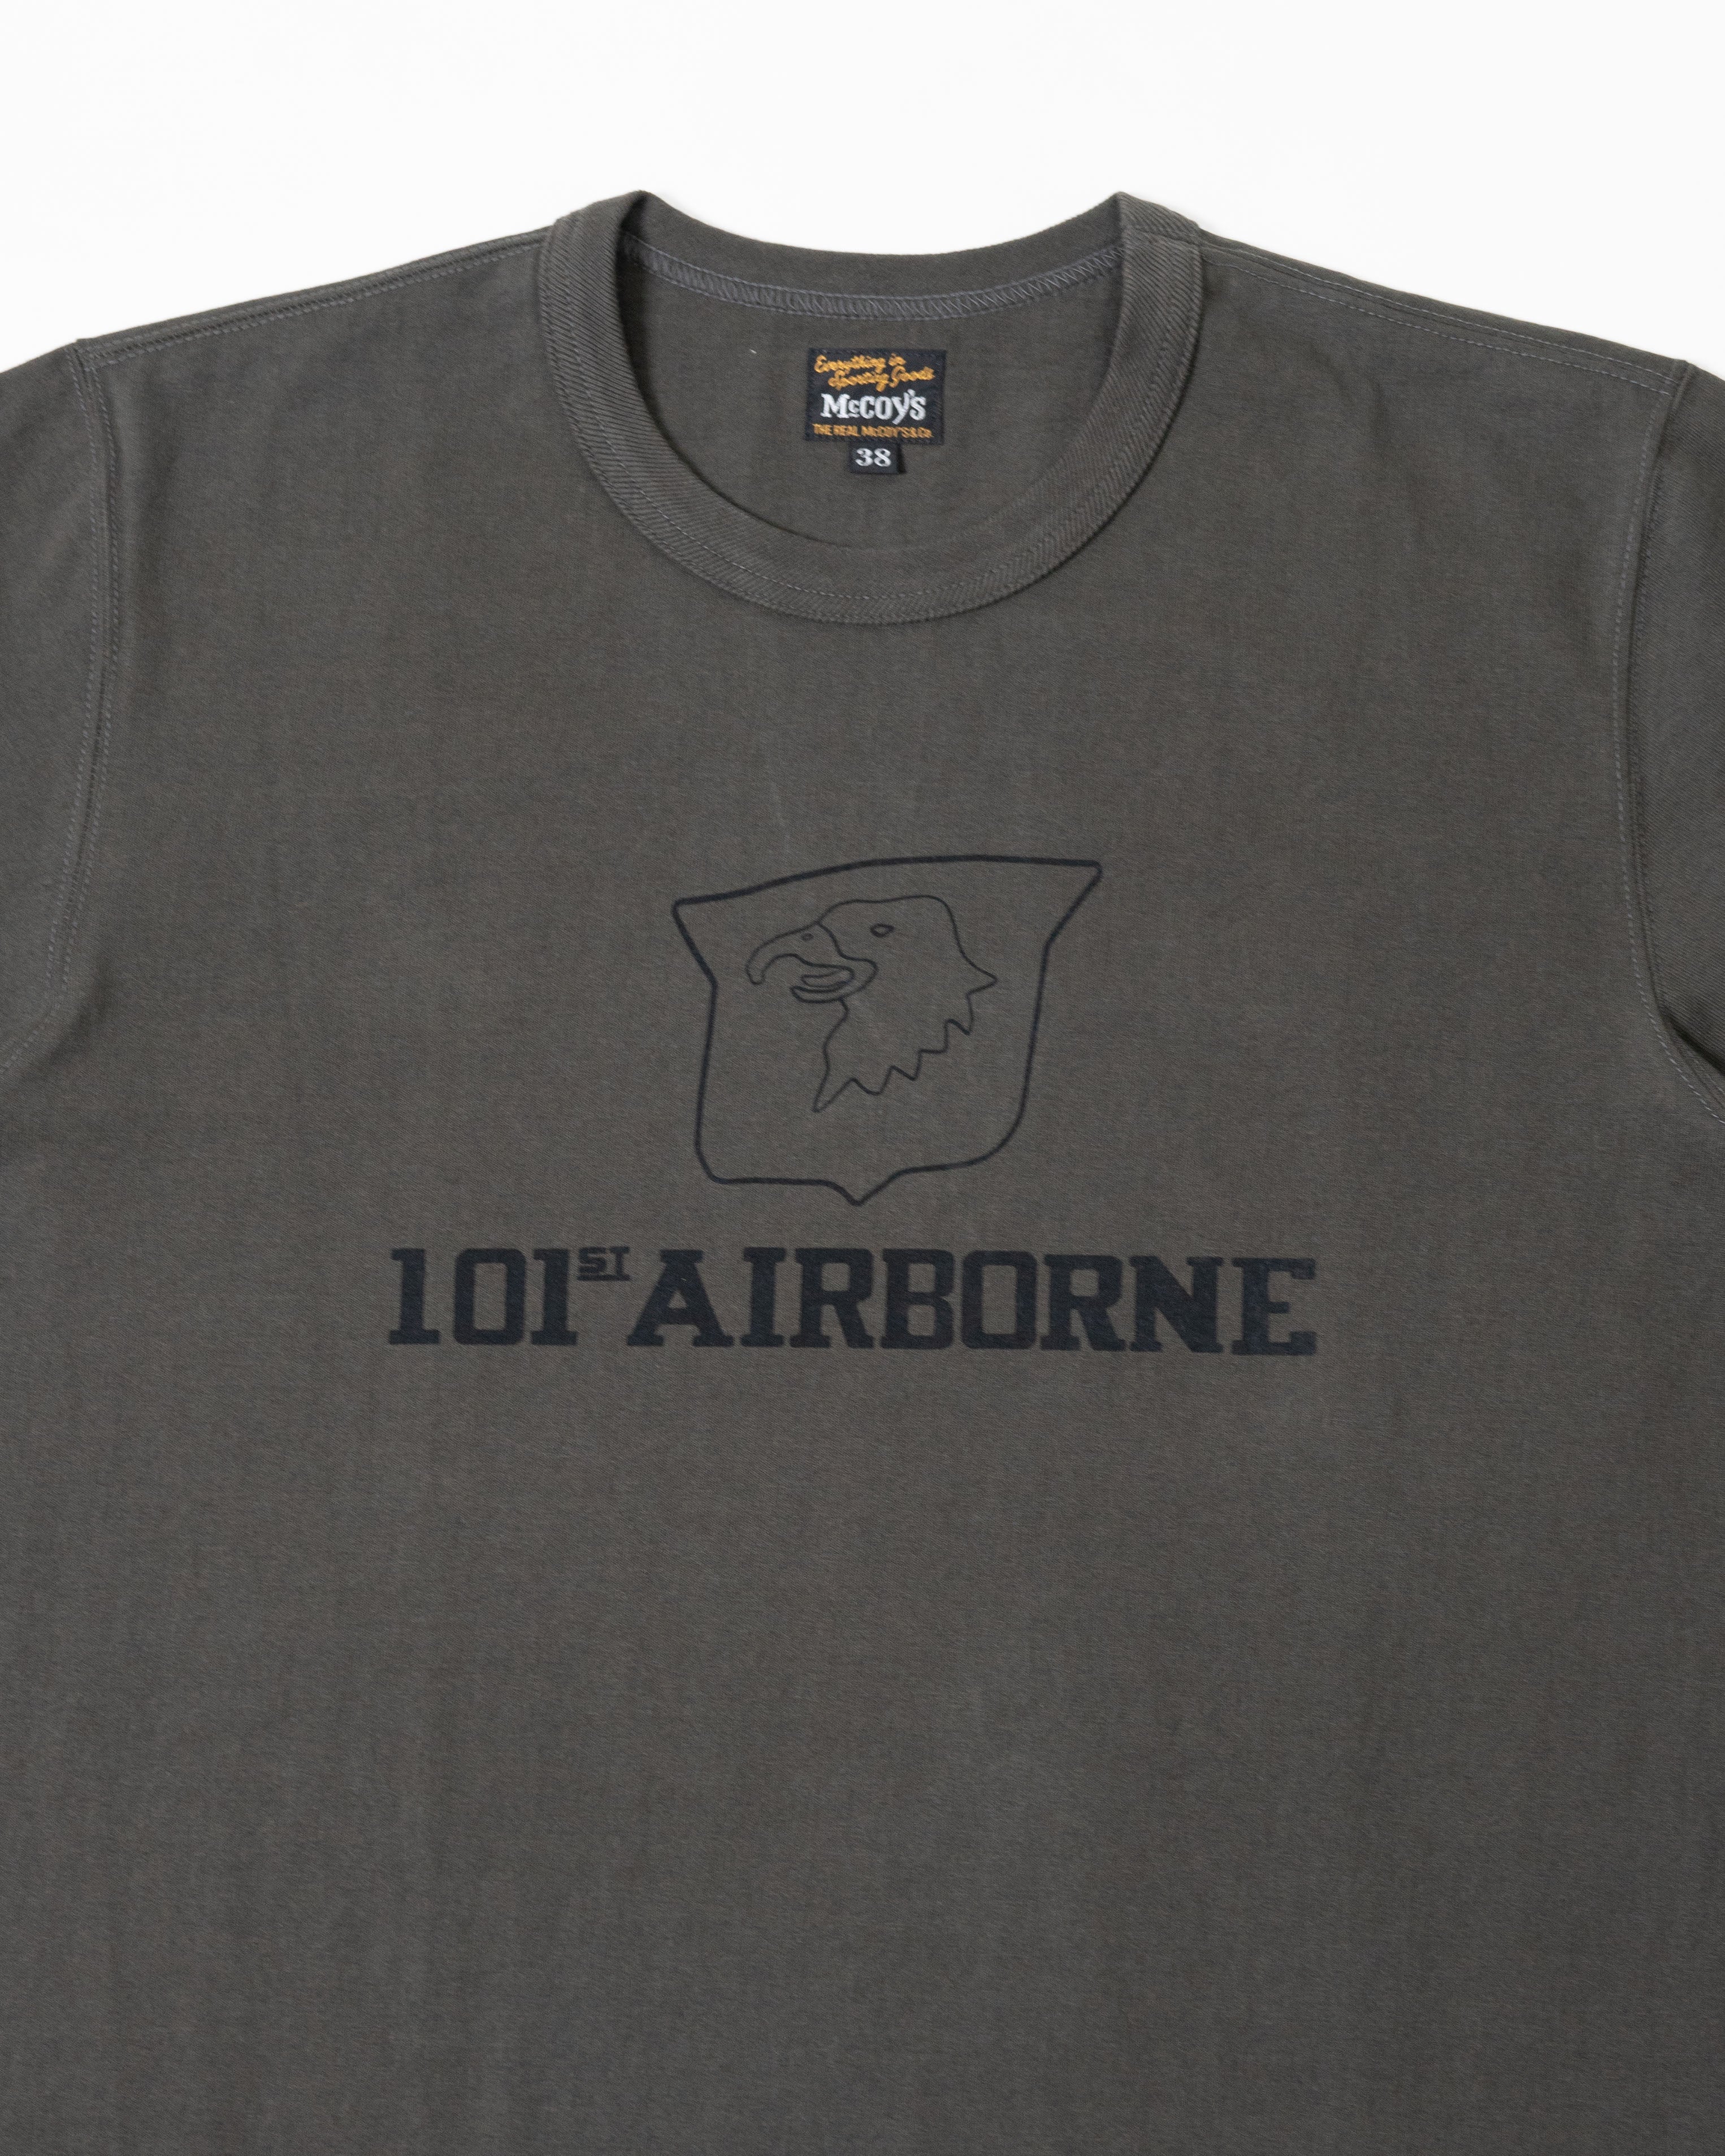 Military Tee/ 101st Airborne - Charcoal